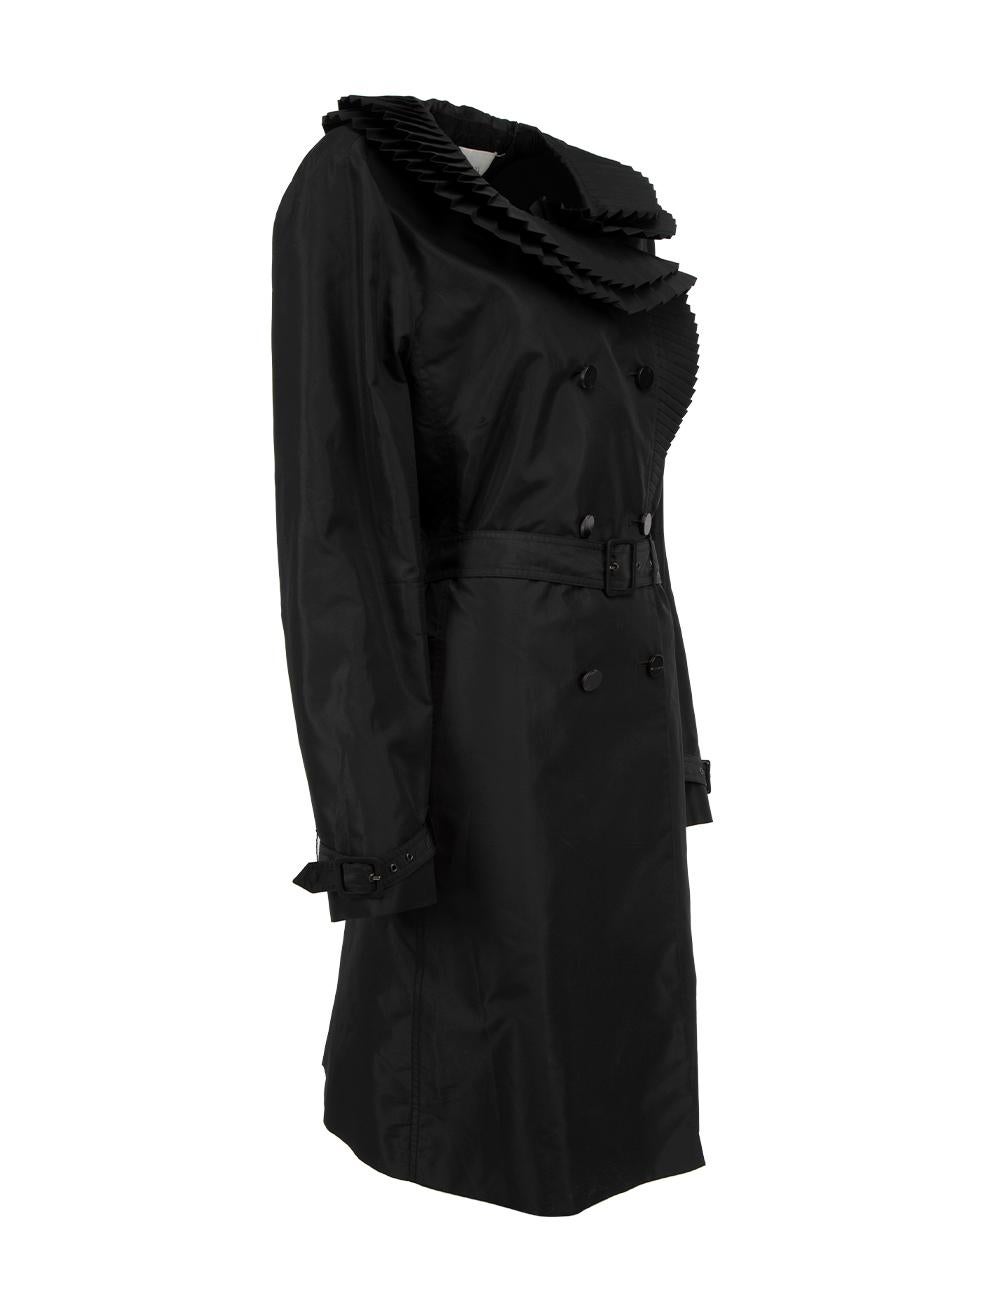 CONDITION is Very good. Hardly any wear visible wear to coat is evident on this used Valentino designer resale item. Details Black Silk Trenchcoat Fitted Pleated collar Button front closure Buckled cuffs Long length 2x Hip pockets Buckled belt Made